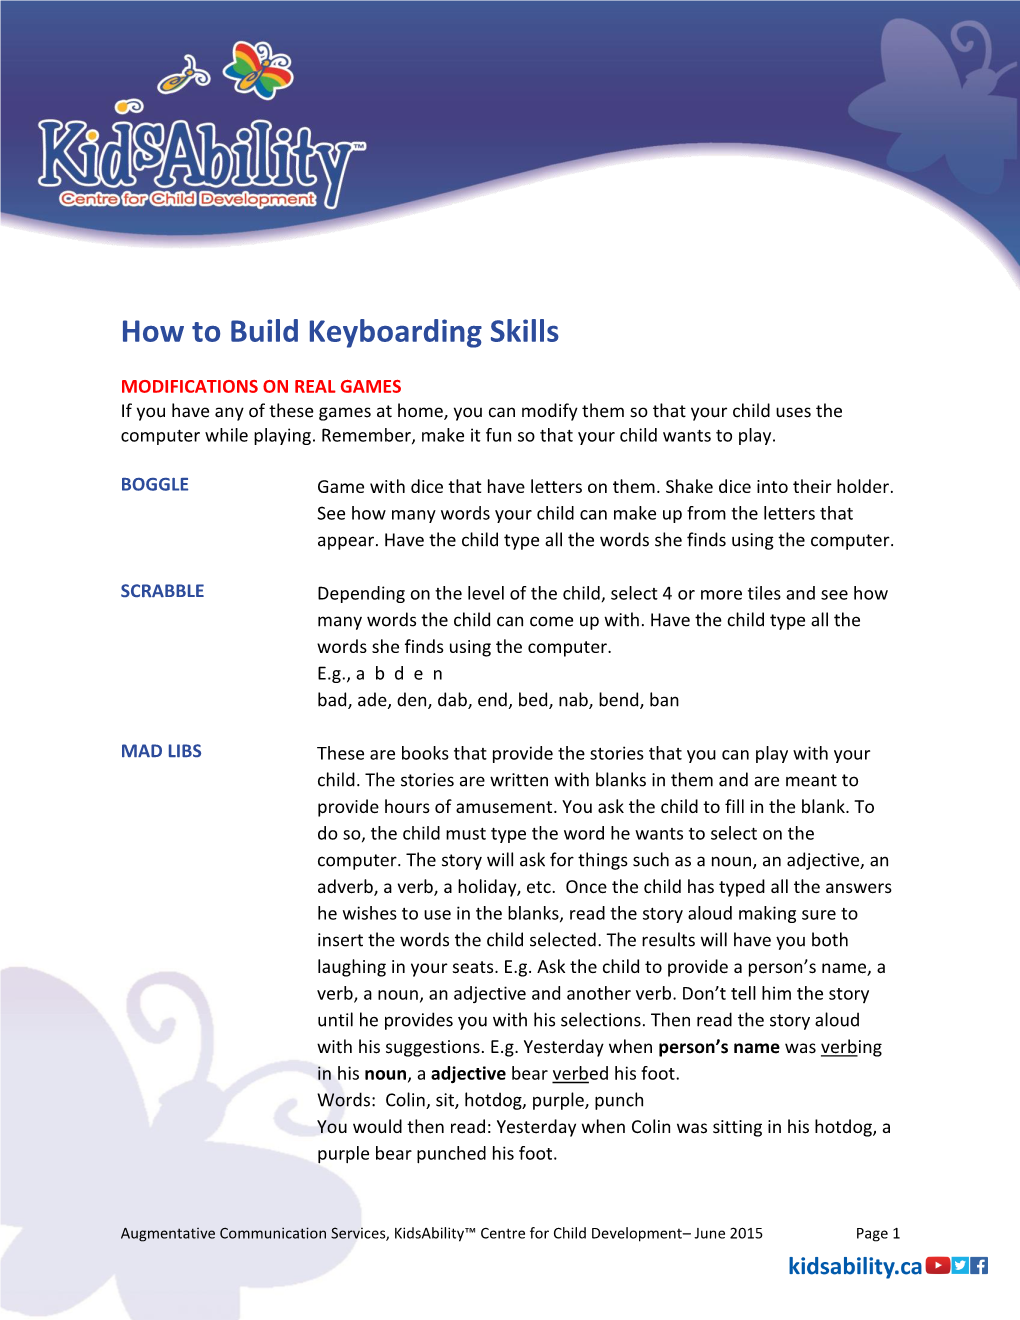 How to Build Keyboarding Skills